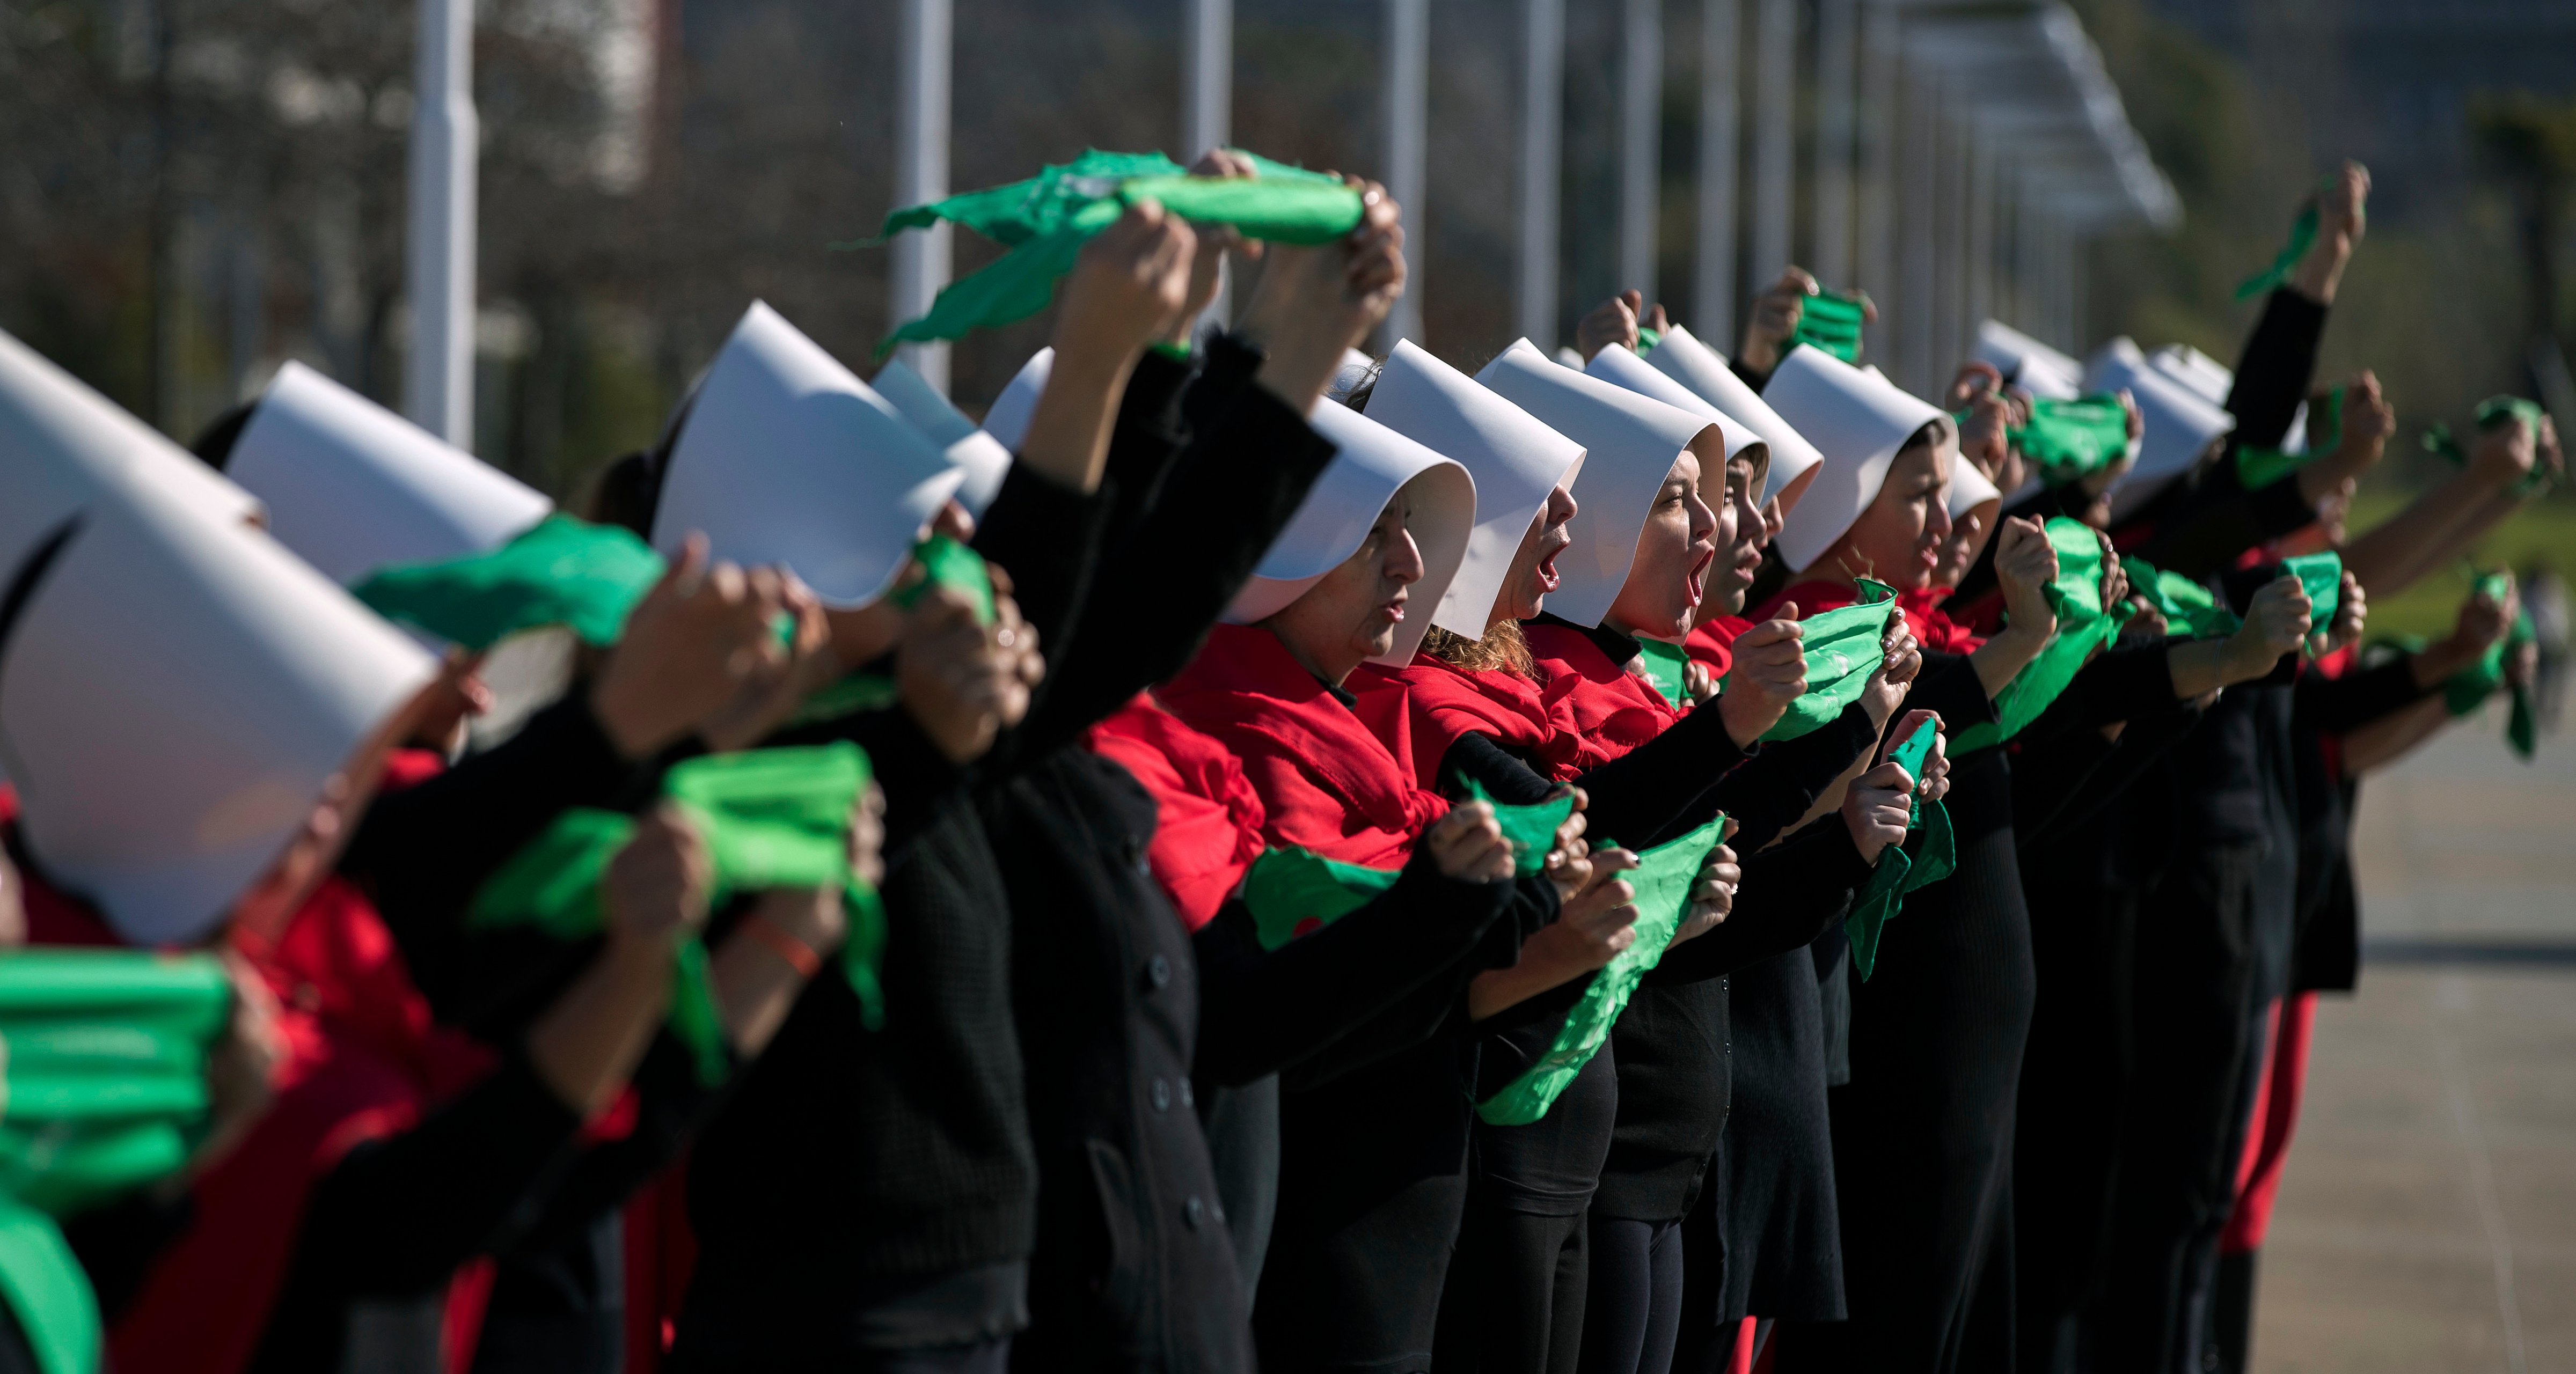 Activists in favour of the legalization of abortion disguised as characters from Canadian author Margaret Atwood's feminist dystopian novel "The Handmaid's Tale,"  display green headscarves as they perform at the "Parque de la Memoria" (Remembrance Park) in Buenos Aires, on August 5, 2018. (Alejandro Pagni—AFP/Getty Images)